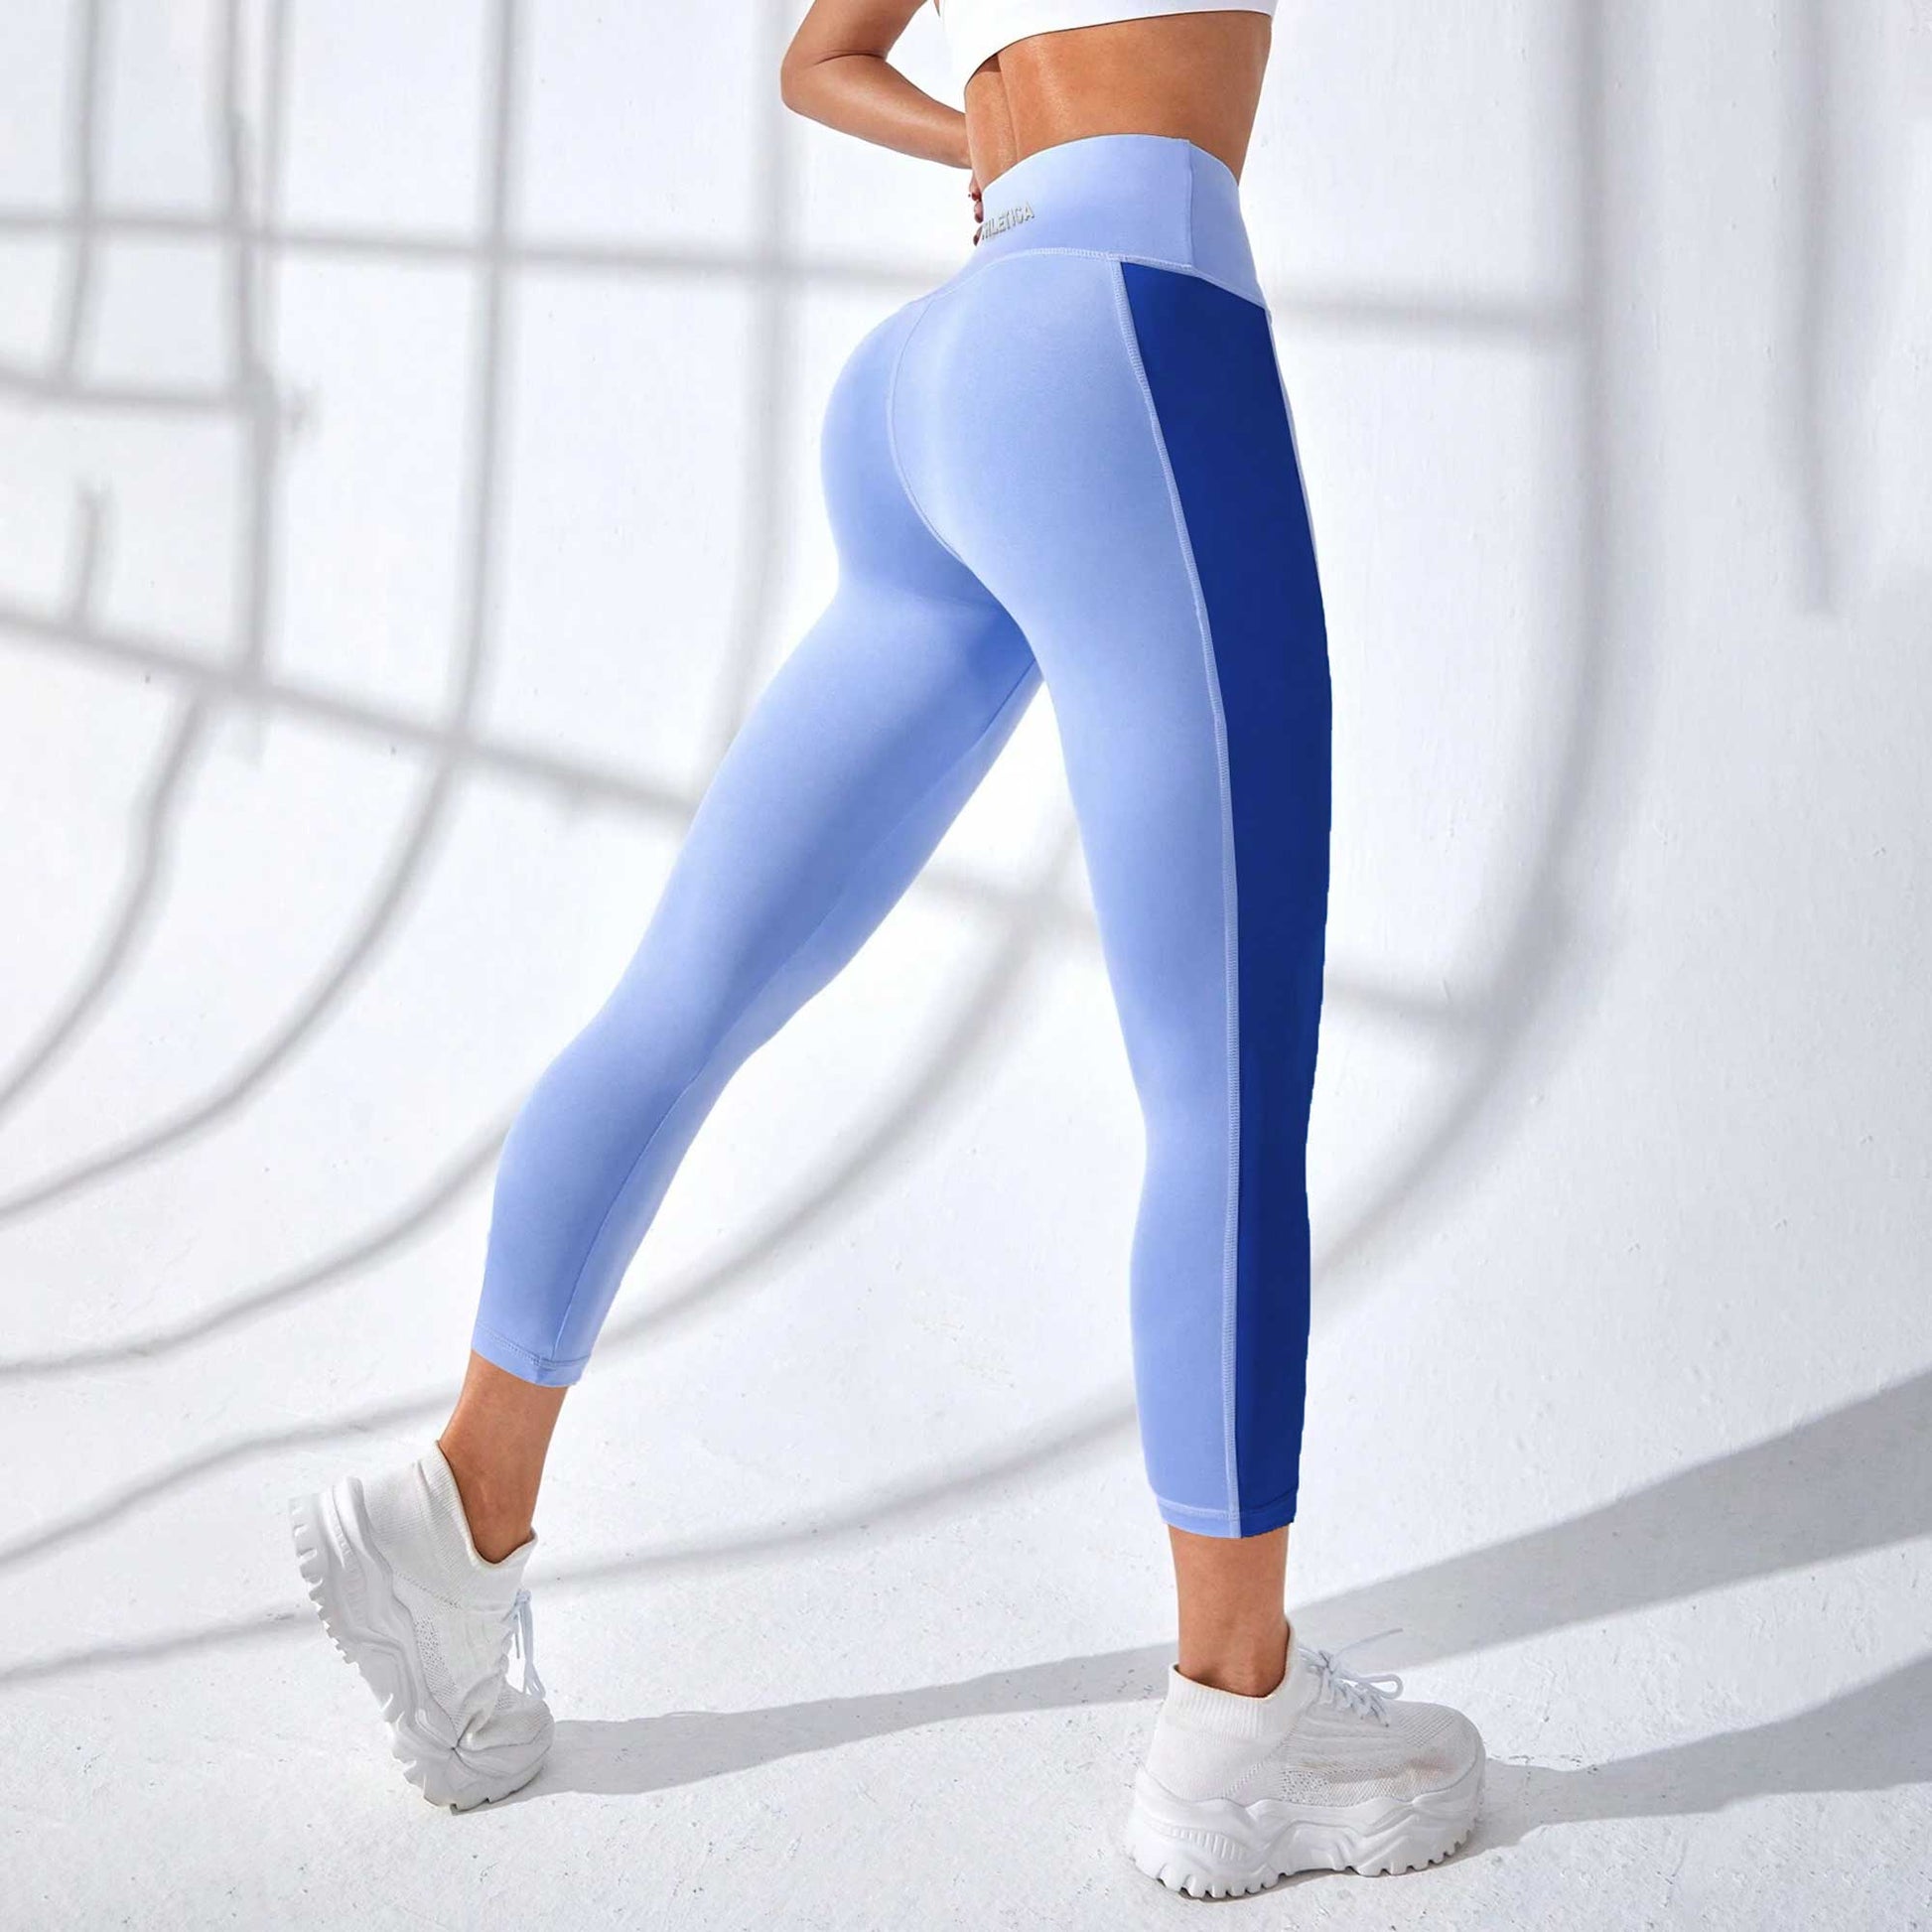 Women's Butter-Soft, Stretchable Activewear Training Leggings